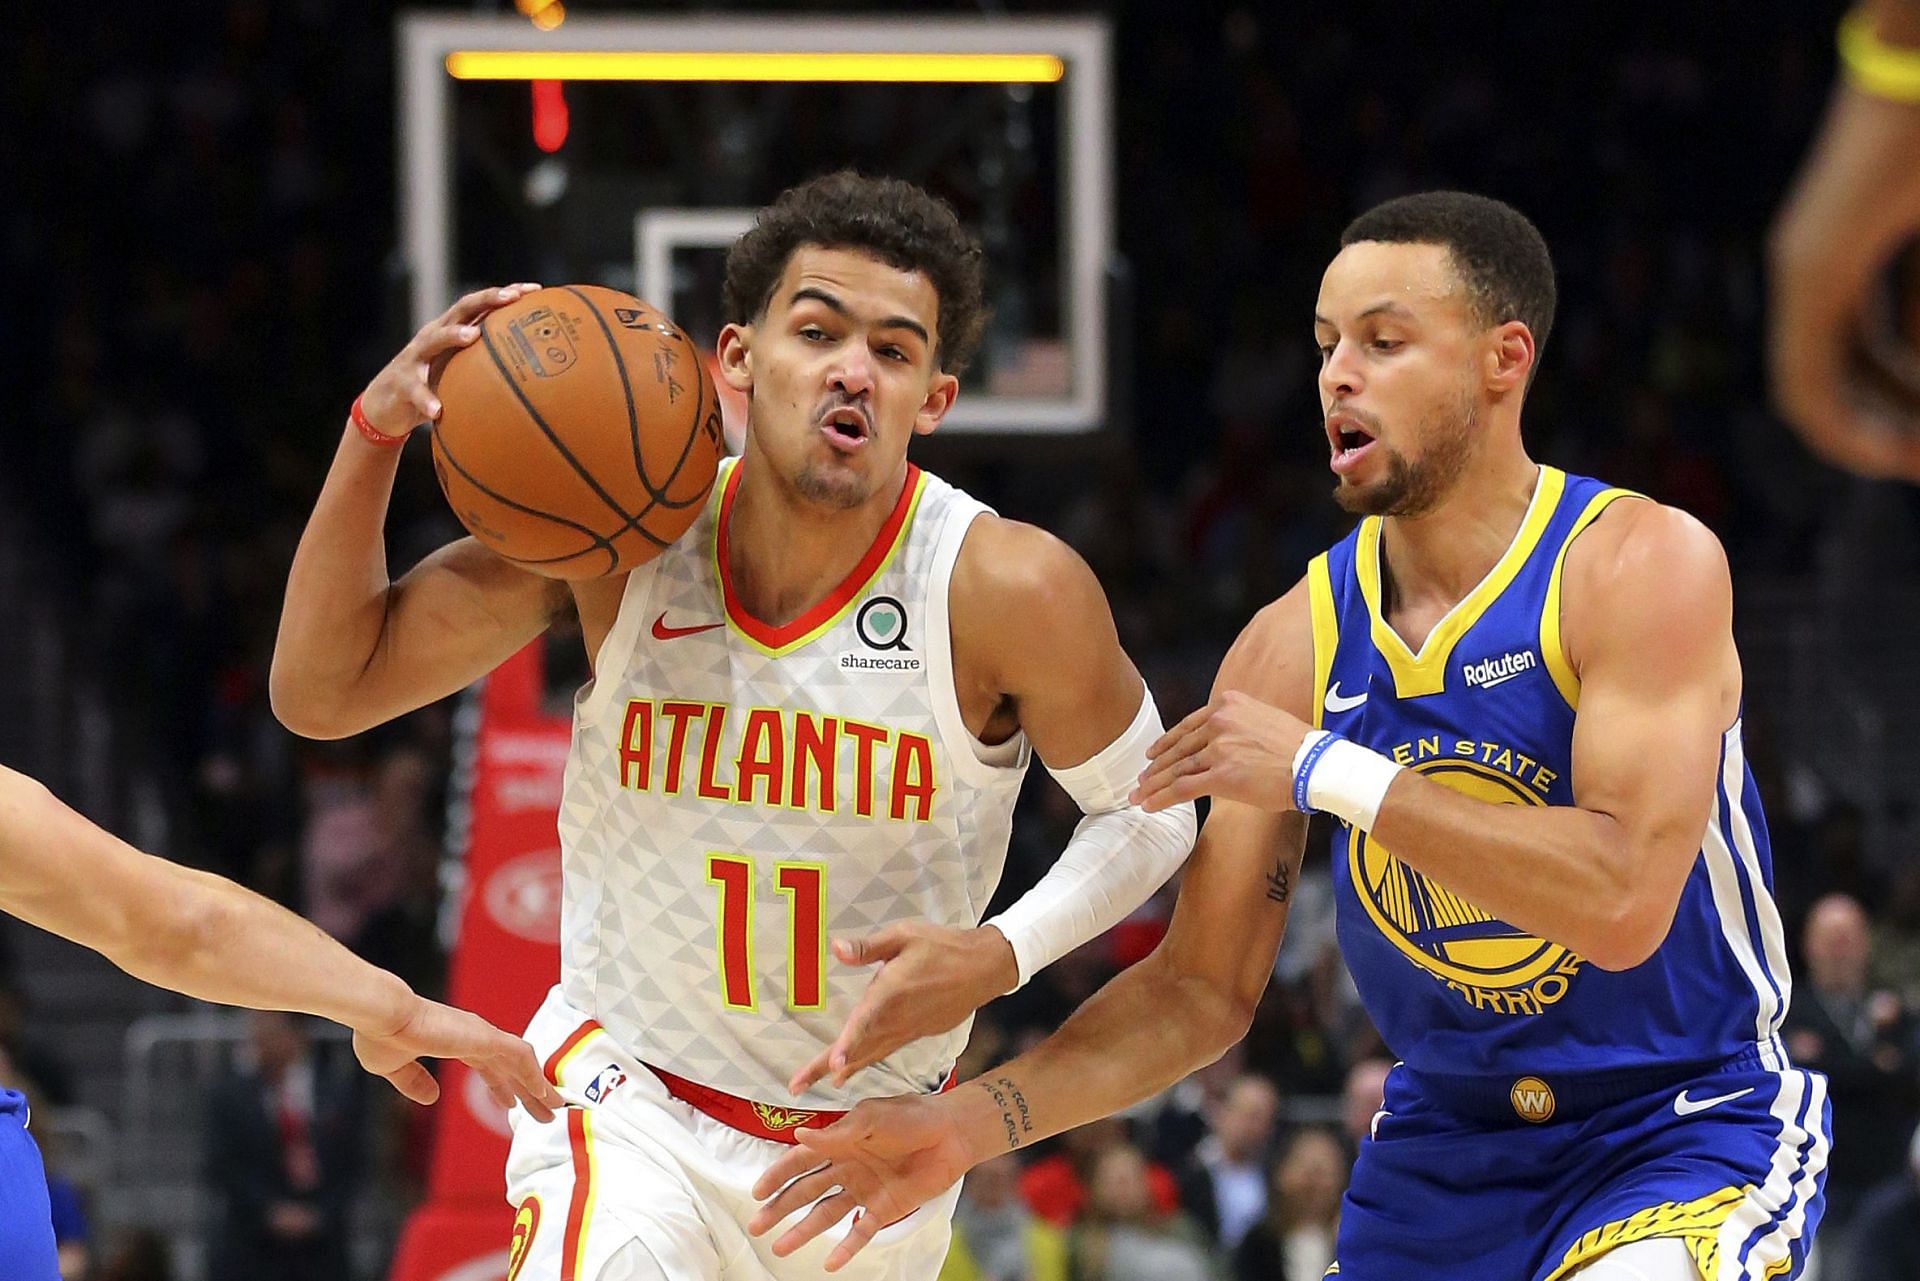 NBA TV will feature the game between the Golden State Warriors and Atlanta Hawks on national TV. [photo: Bleacher Report]